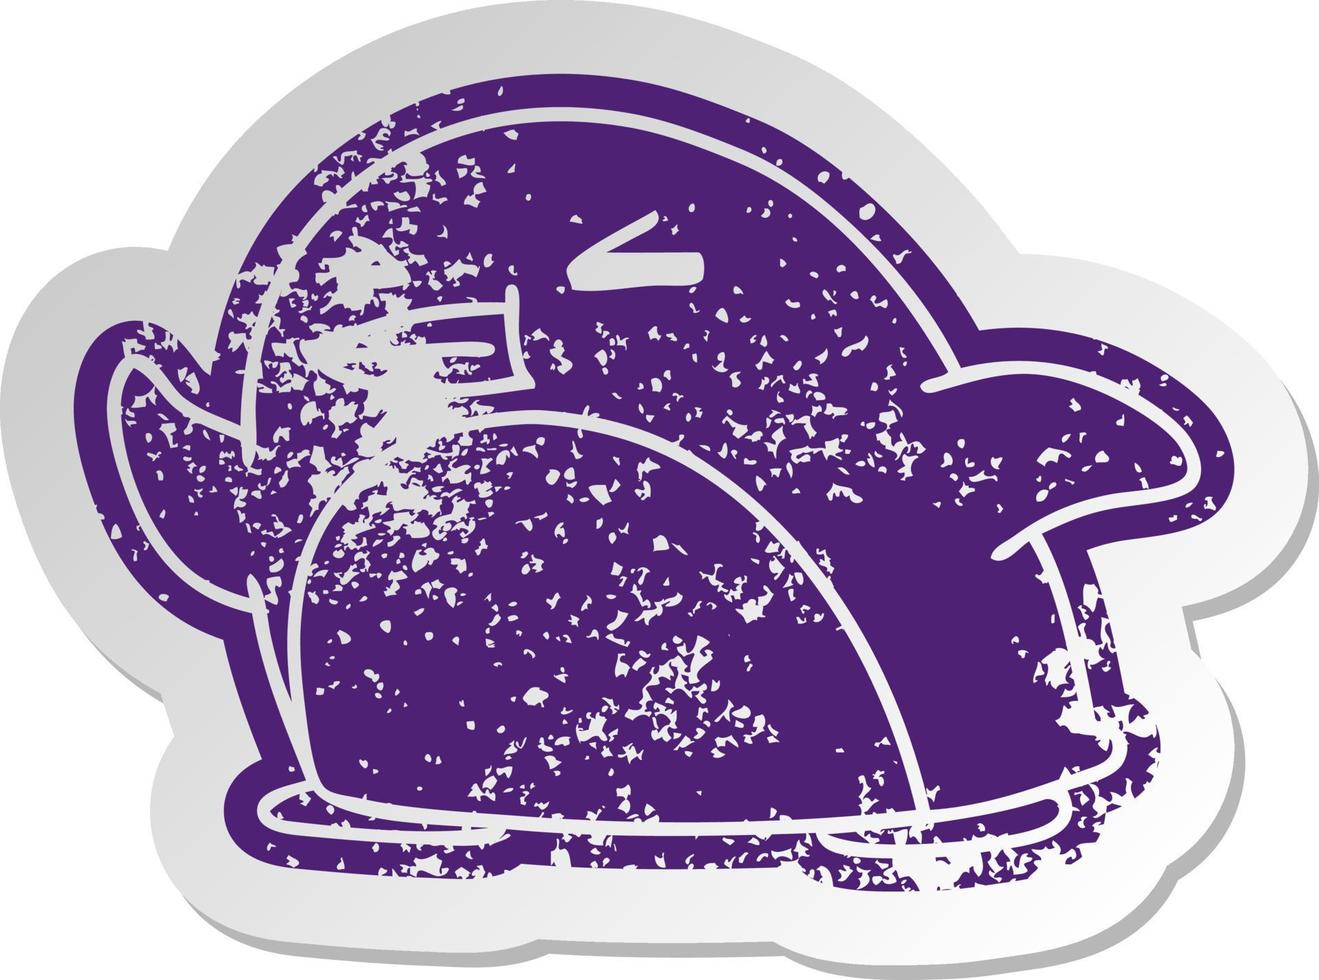 distressed old sticker kawaii of a cute penguin vector